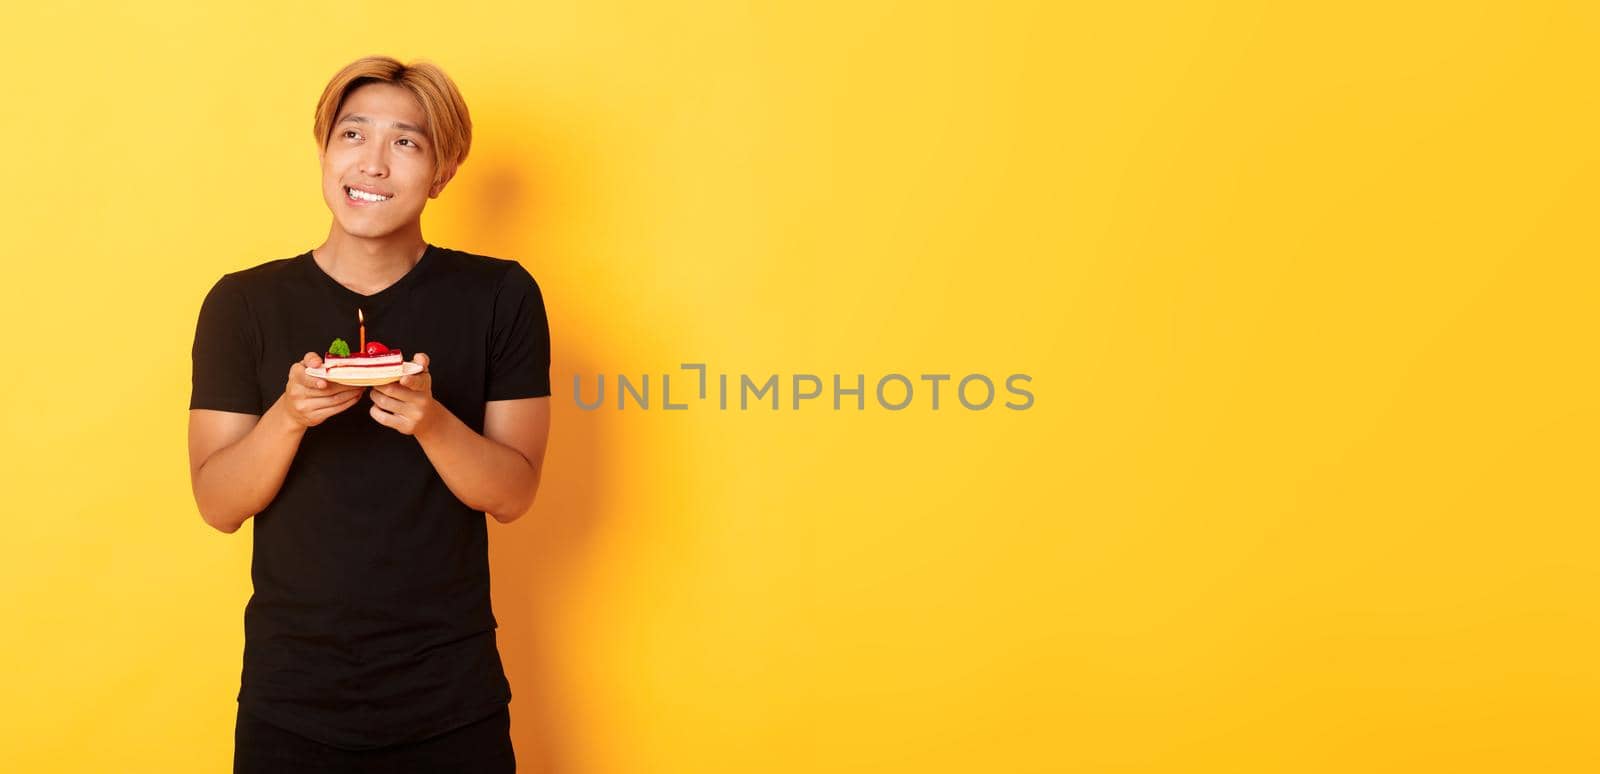 Portrait of handsome dreamy asian guy looking upper left corner and thinking, making wish while celebrating birthday and holding b-day cake, yellow background.